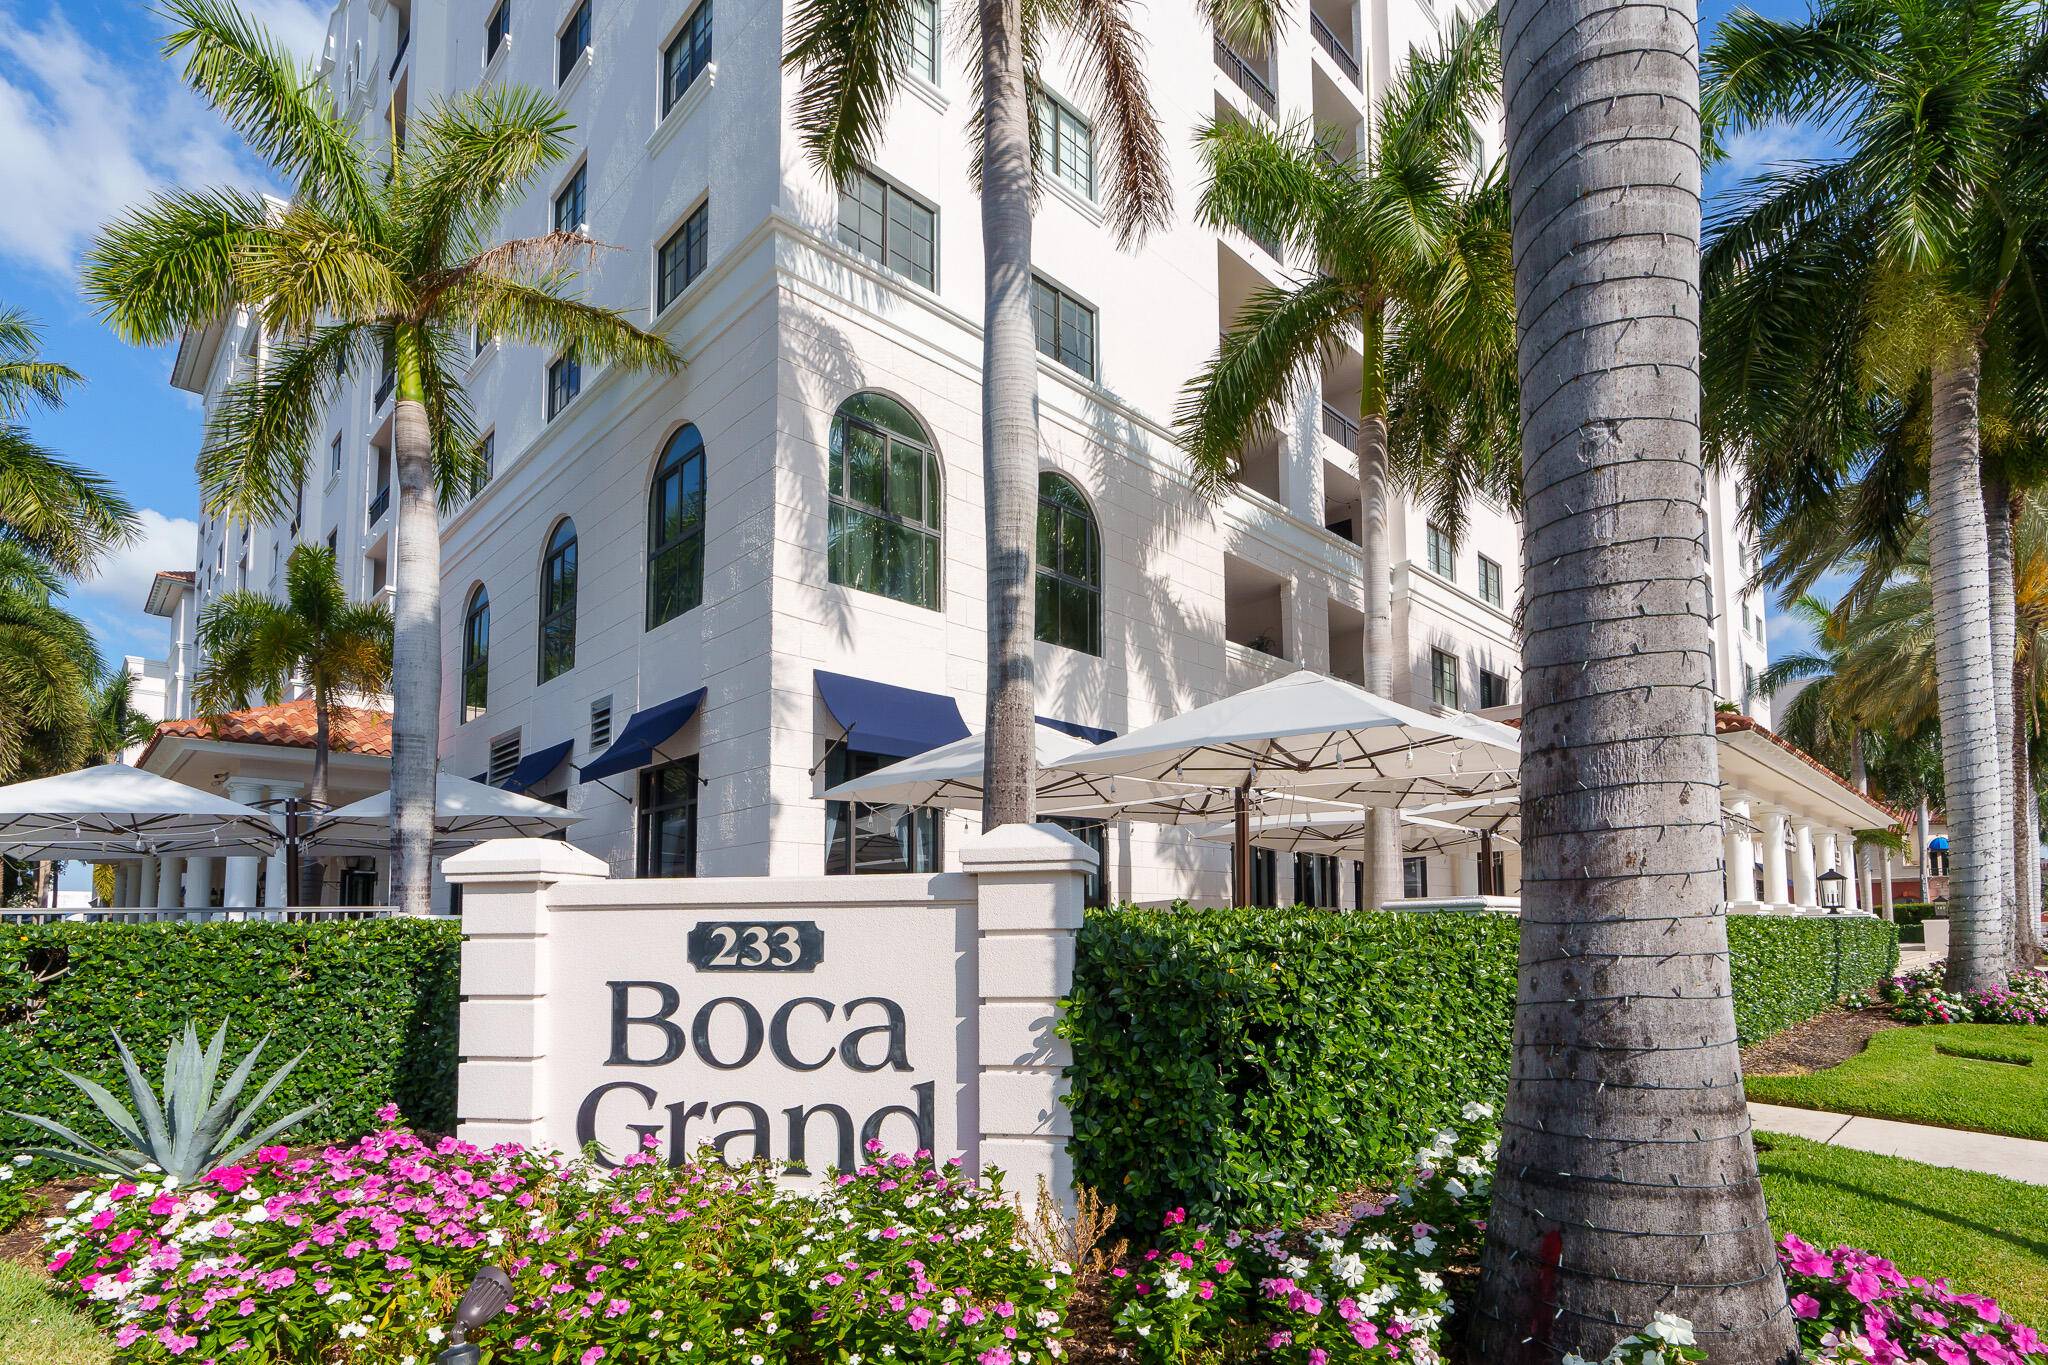 Newly renovated ! ! The Boca Grand Condo sounds like a dream come true for anyone seeking the perfect blend of luxury, convenience, and comfort in downtown Boca Raton.